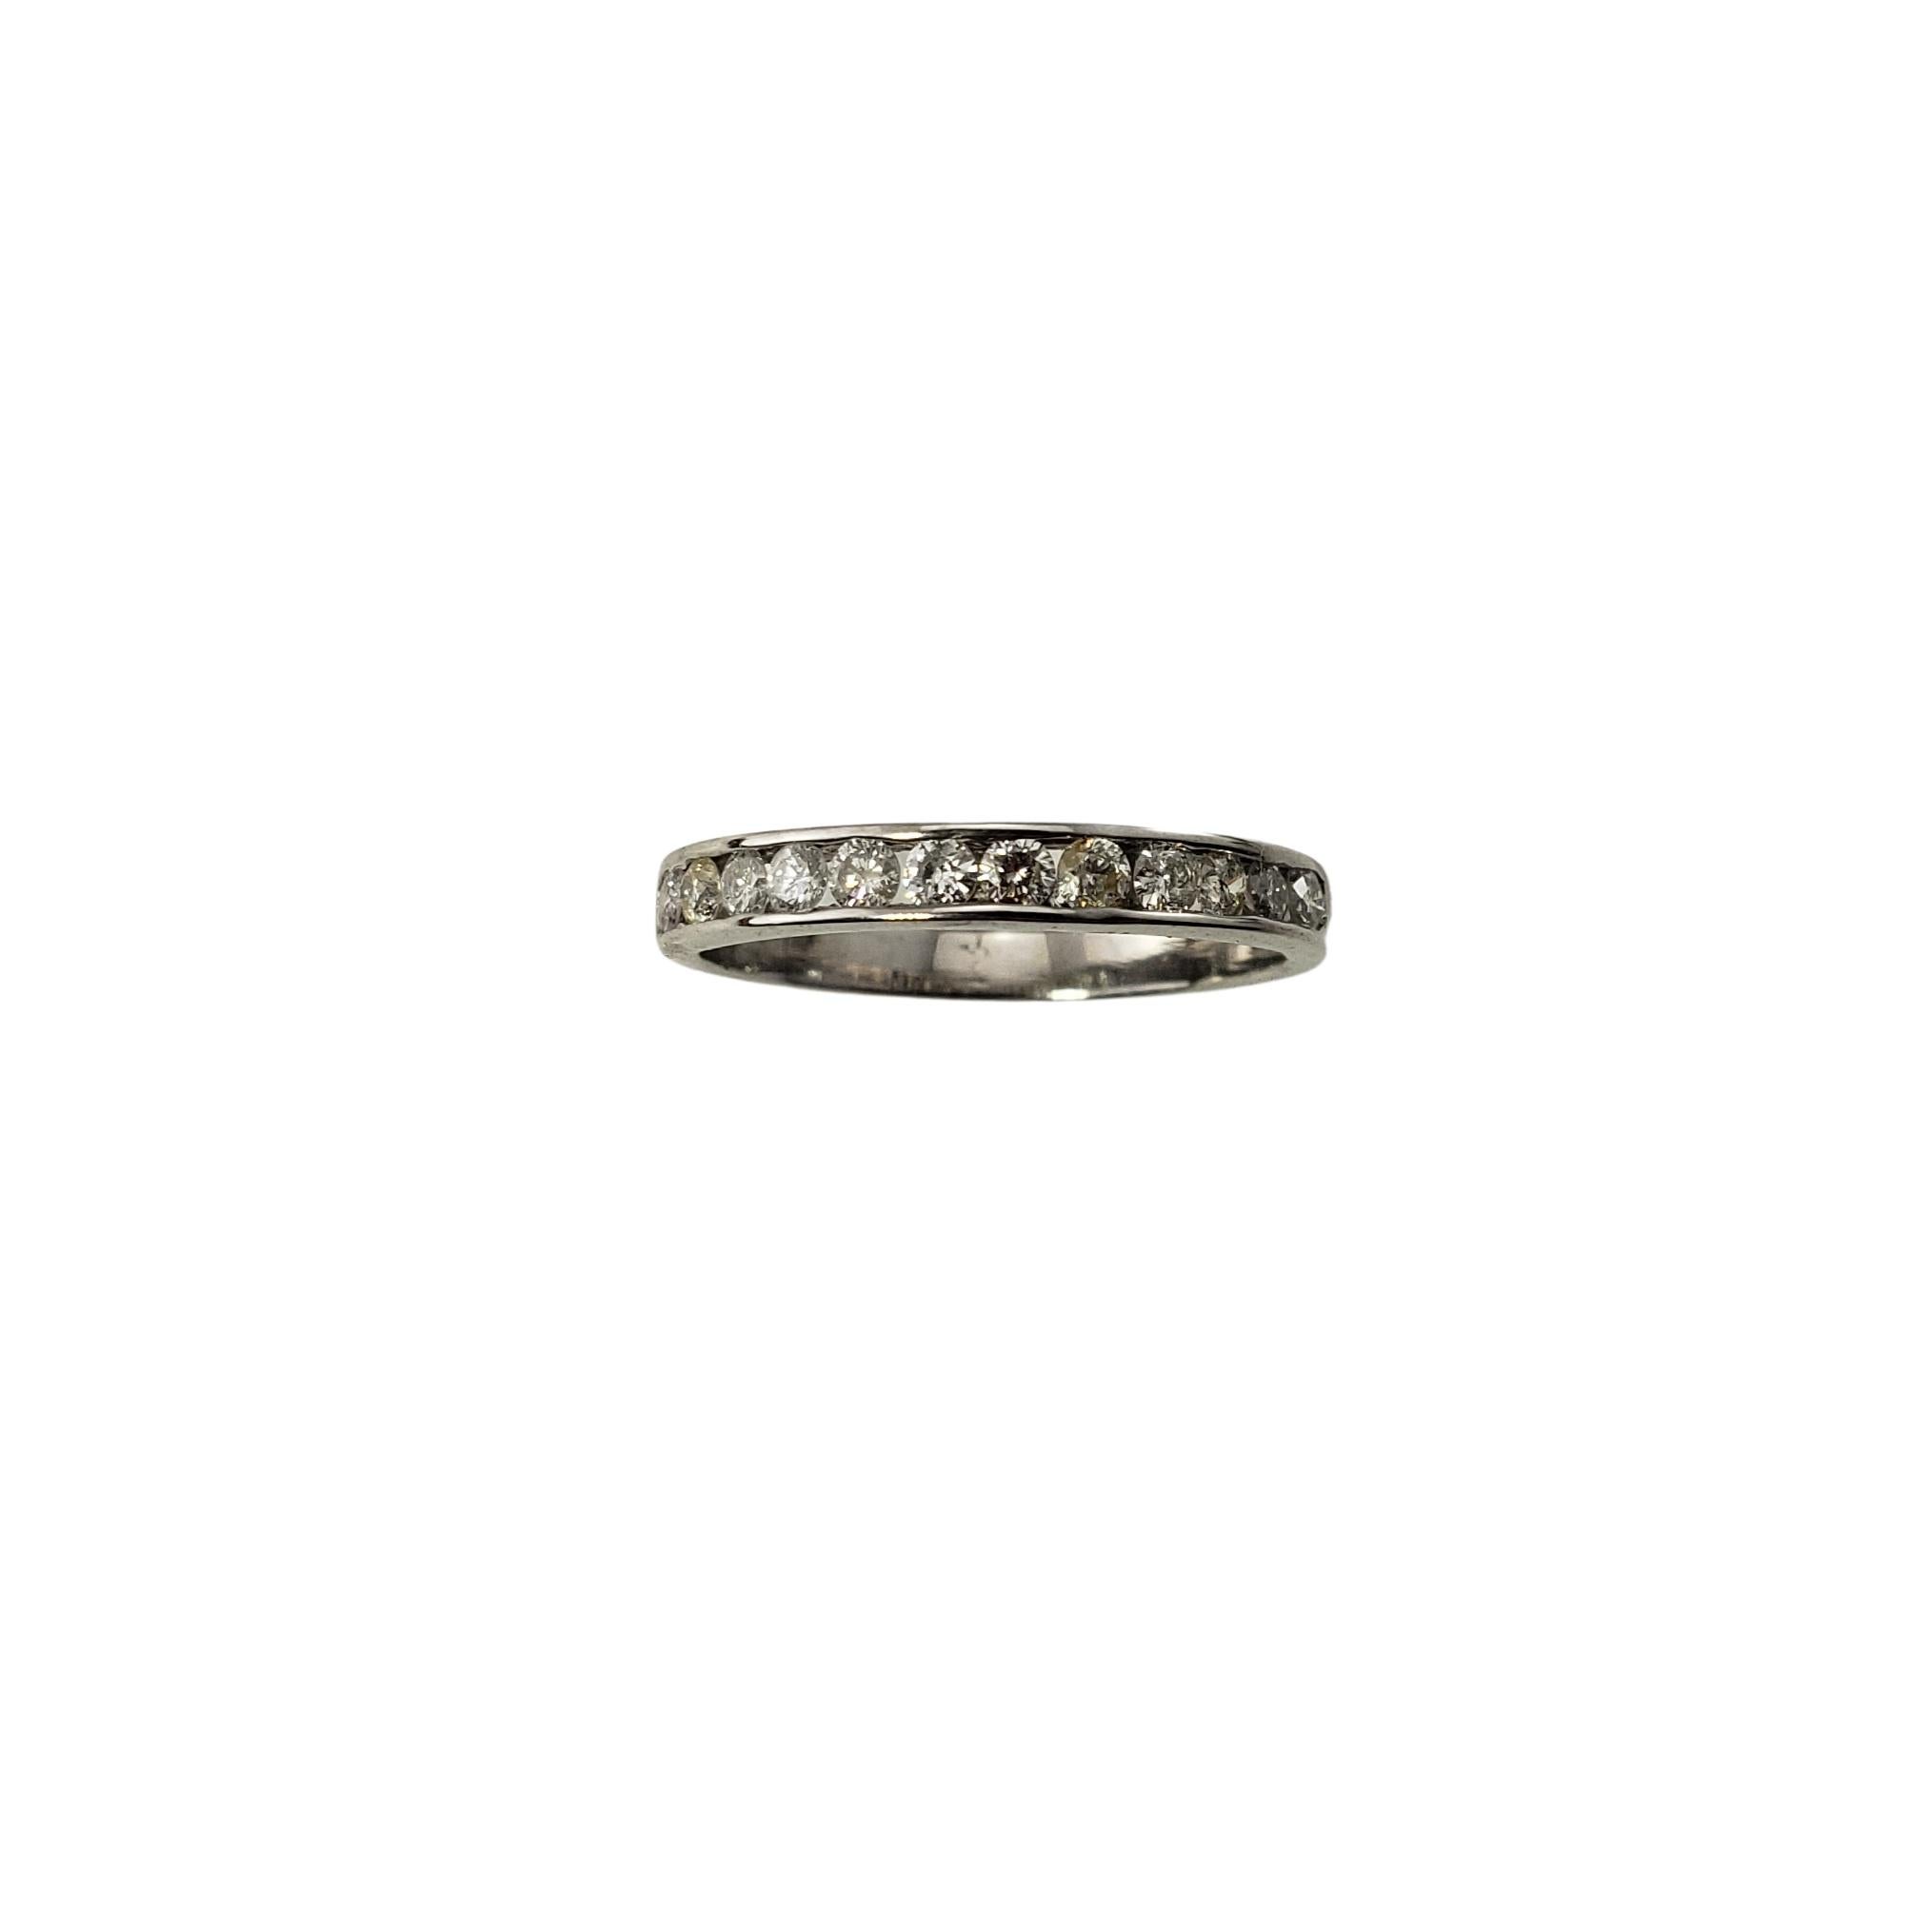 14 Karat White Gold and Diamond Wedding Band Ring Size 5.25-

This sparkling band features 12 round brilliant cut diamonds set in classic 14K white gold.  Width:  3 mm.

Approximate total diamond weight:  .36 ct.

Diamond color: H-I

Diamond